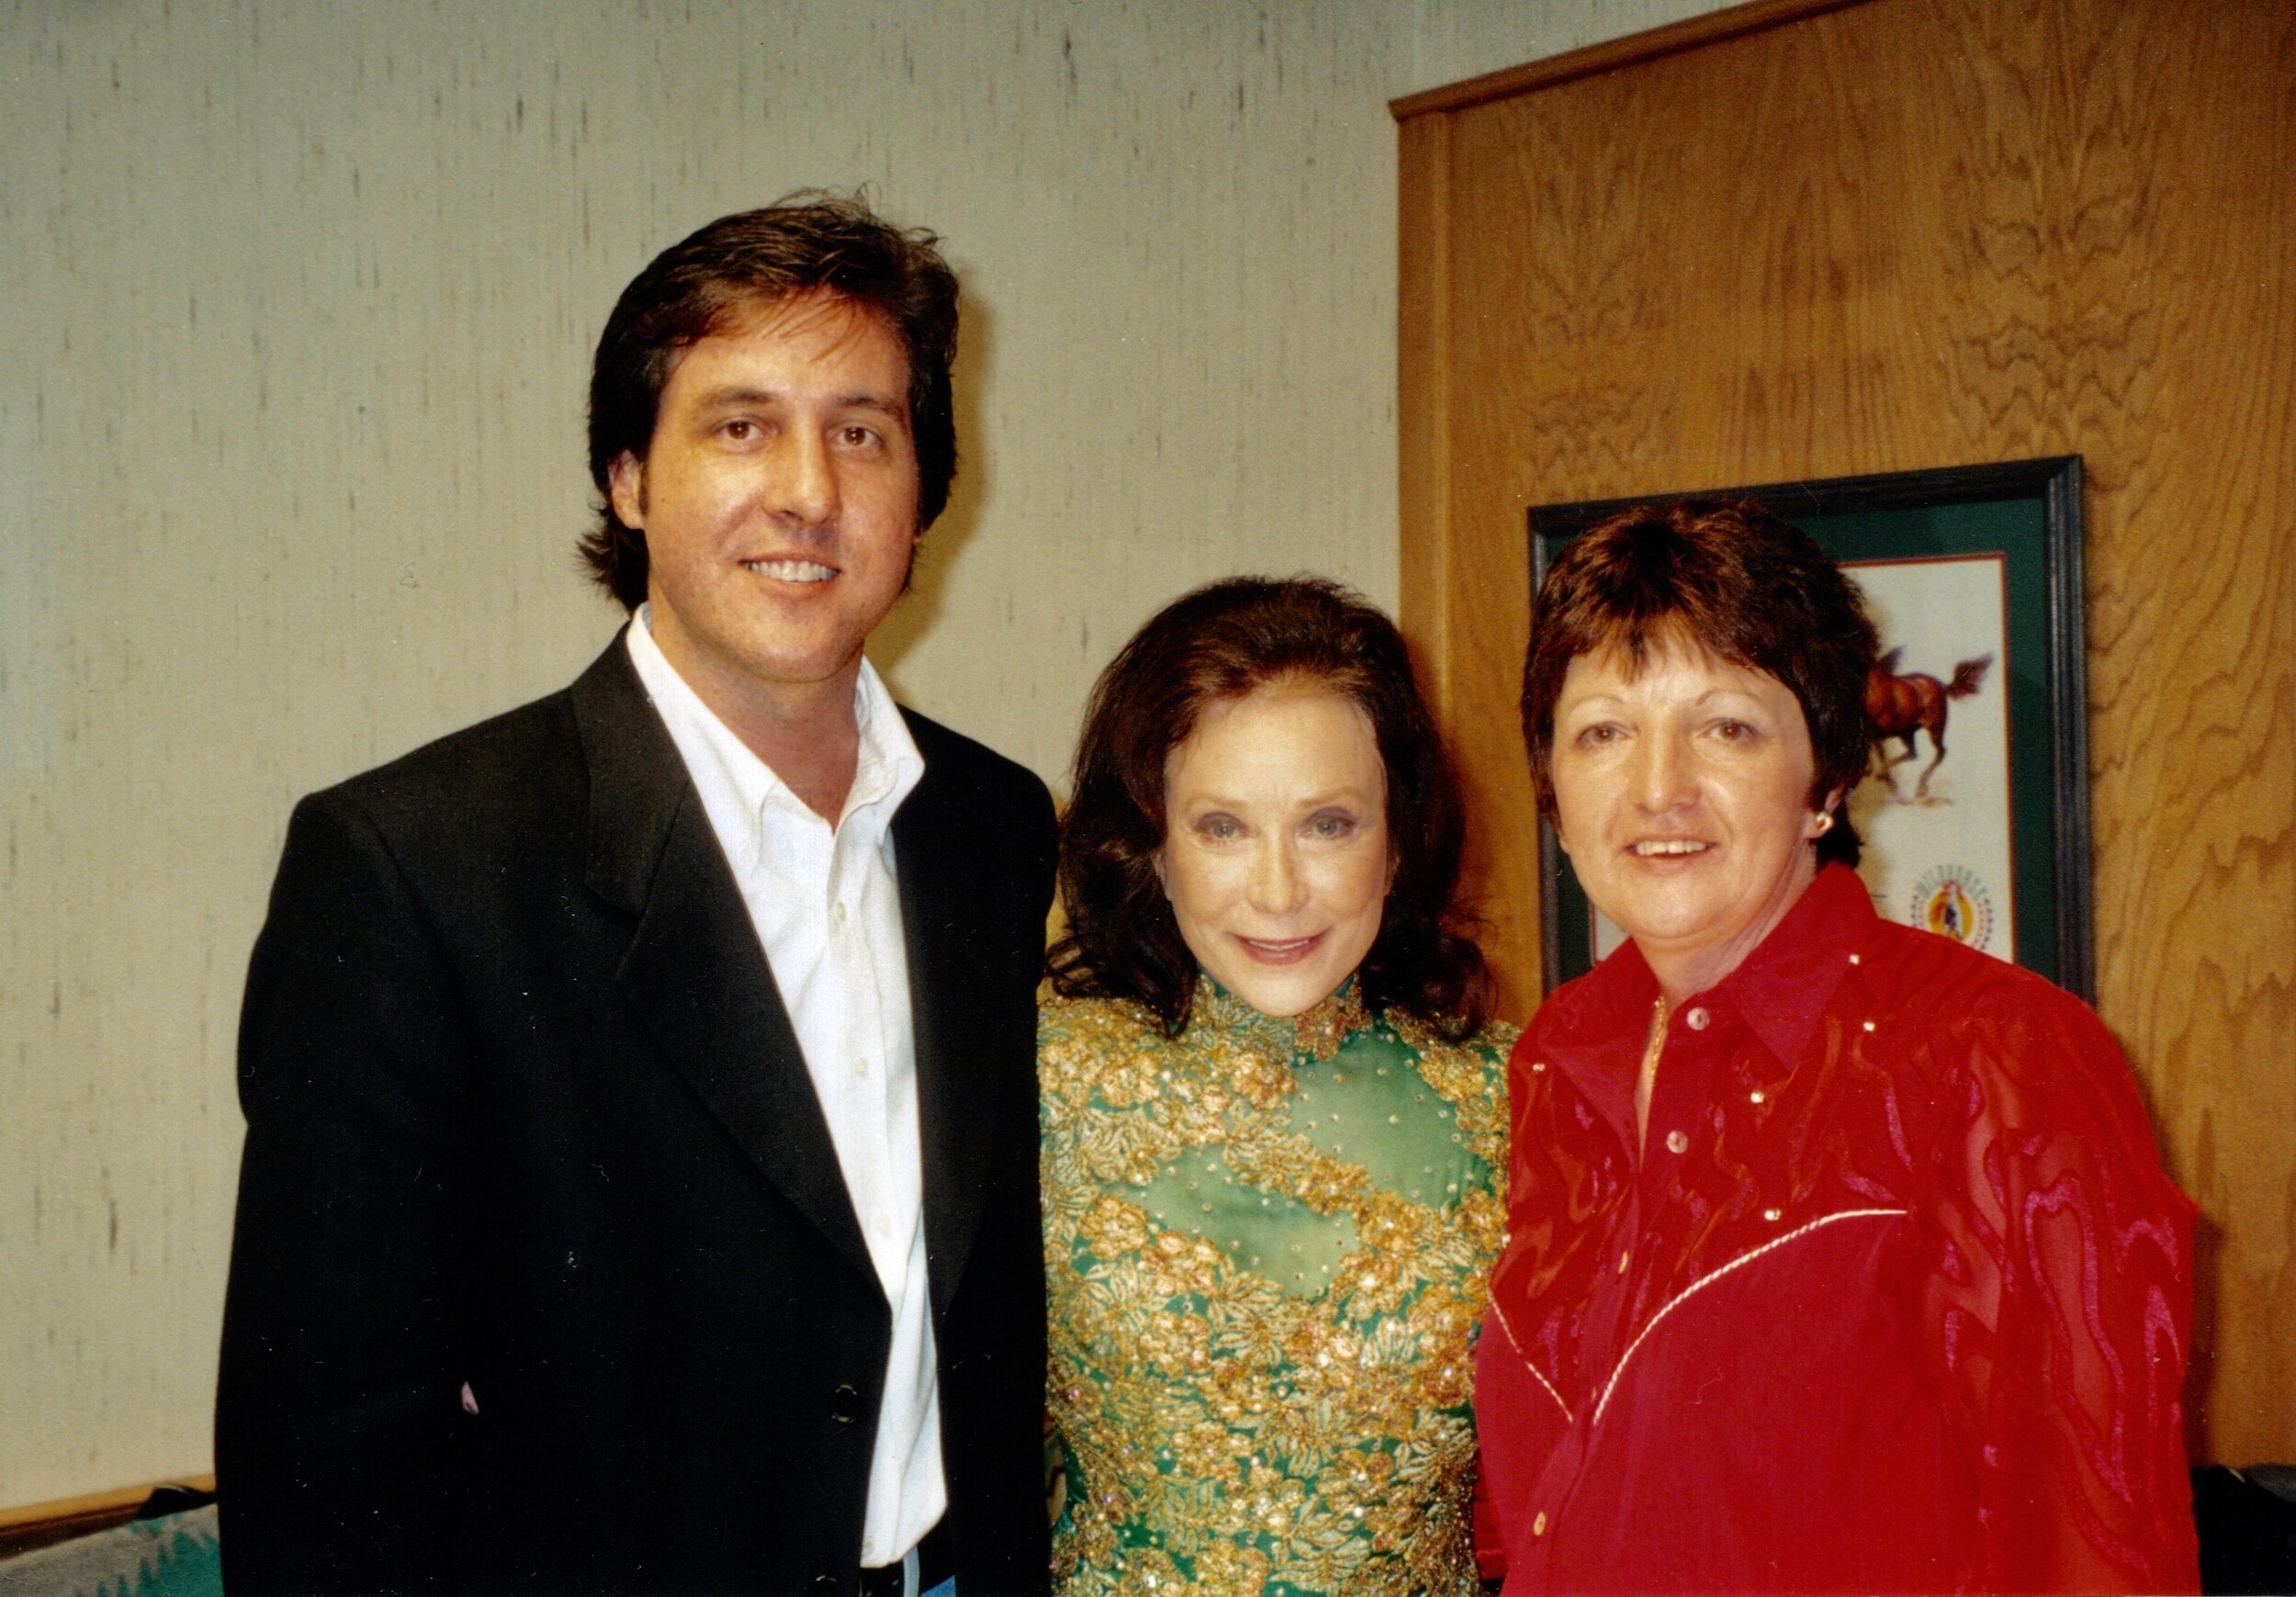  Back stage at the Grand Ole Opry with Loretta Lynn and a friend. 